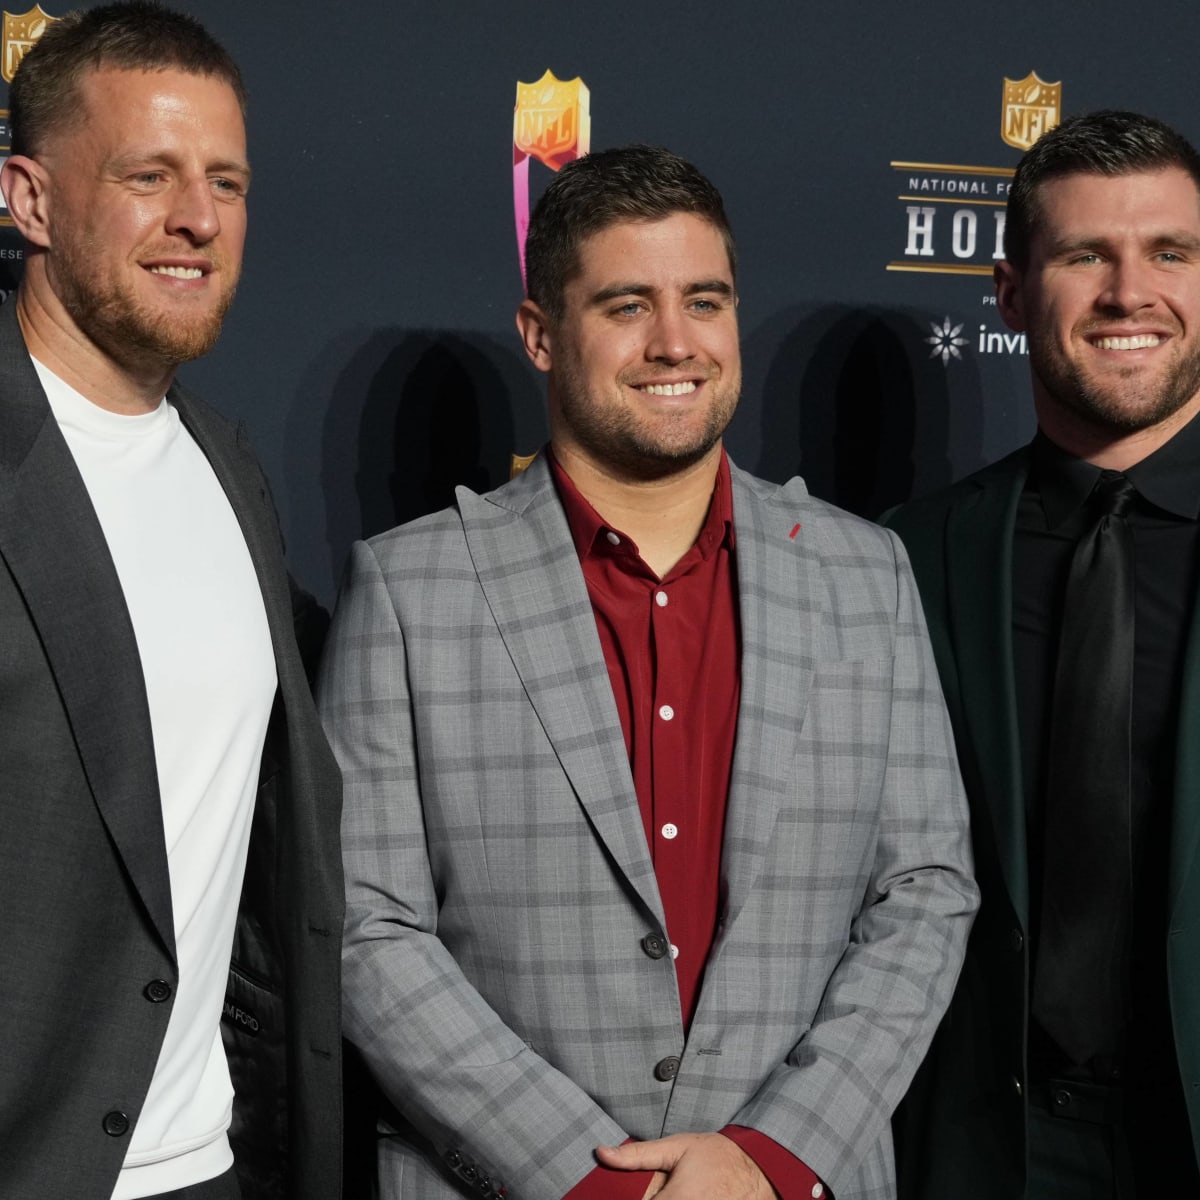 Three Watt brothers appearing in same NFL game Sunday